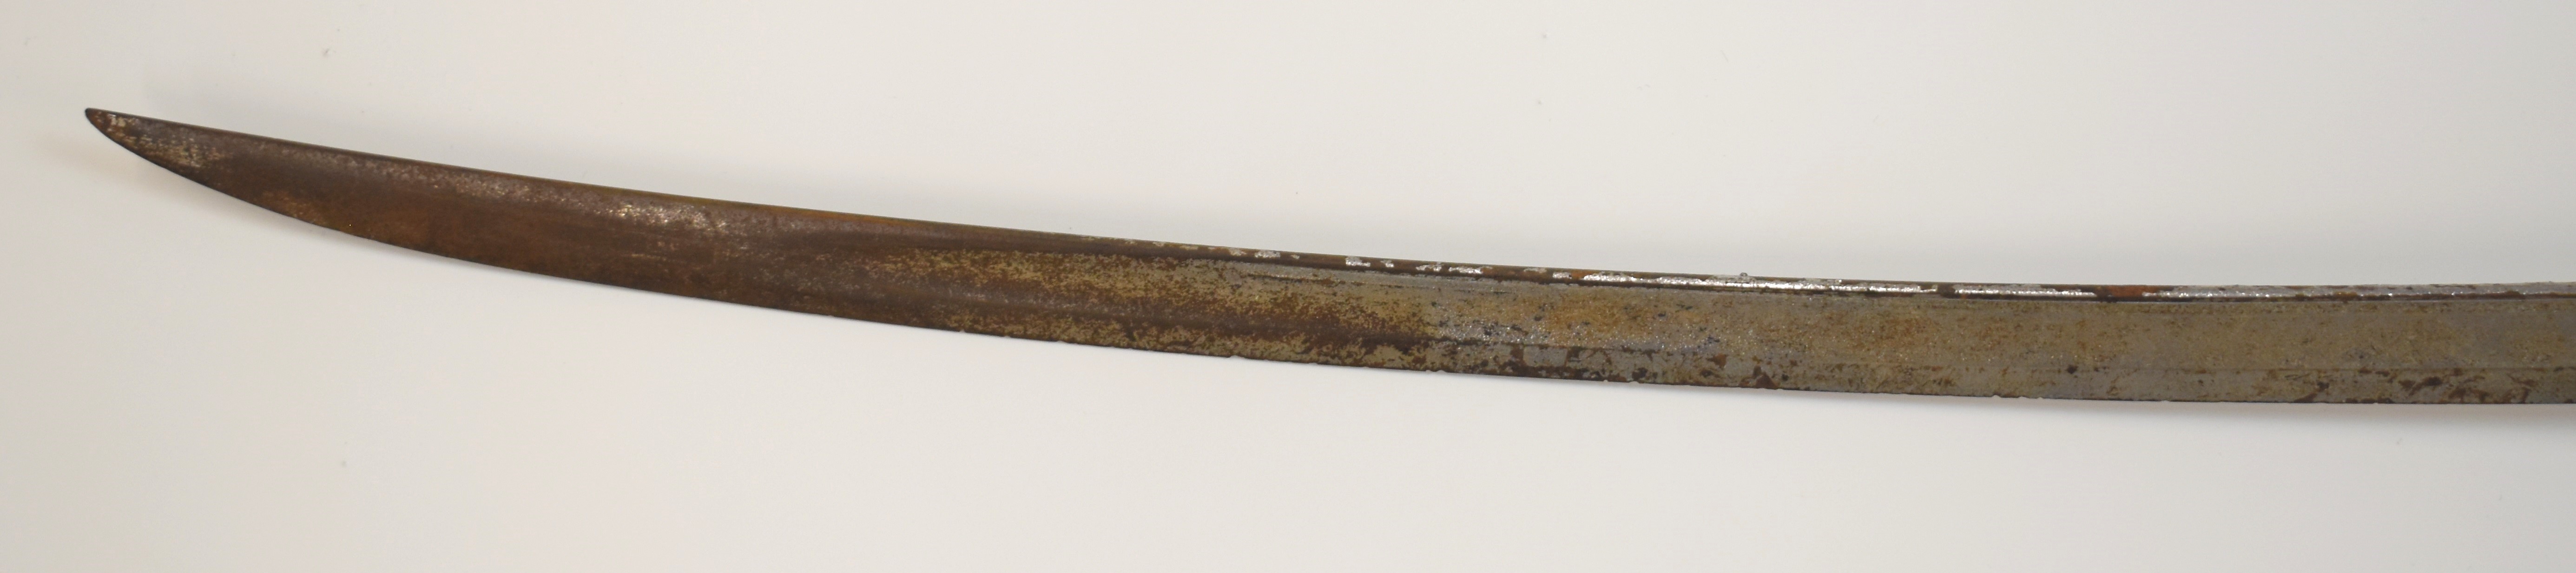 American Civil War sword with wooden grip, two bar hilt, US 1864 AGM to ricasso and Crosby - Image 26 of 26